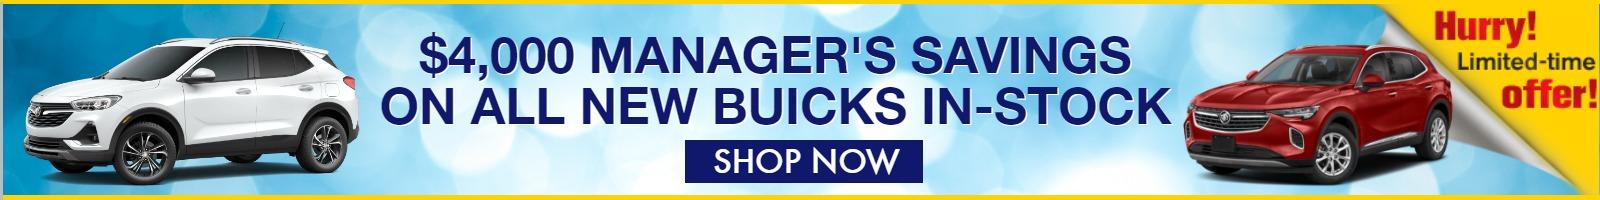 "$4,000 Manager's Special on all new Buicks